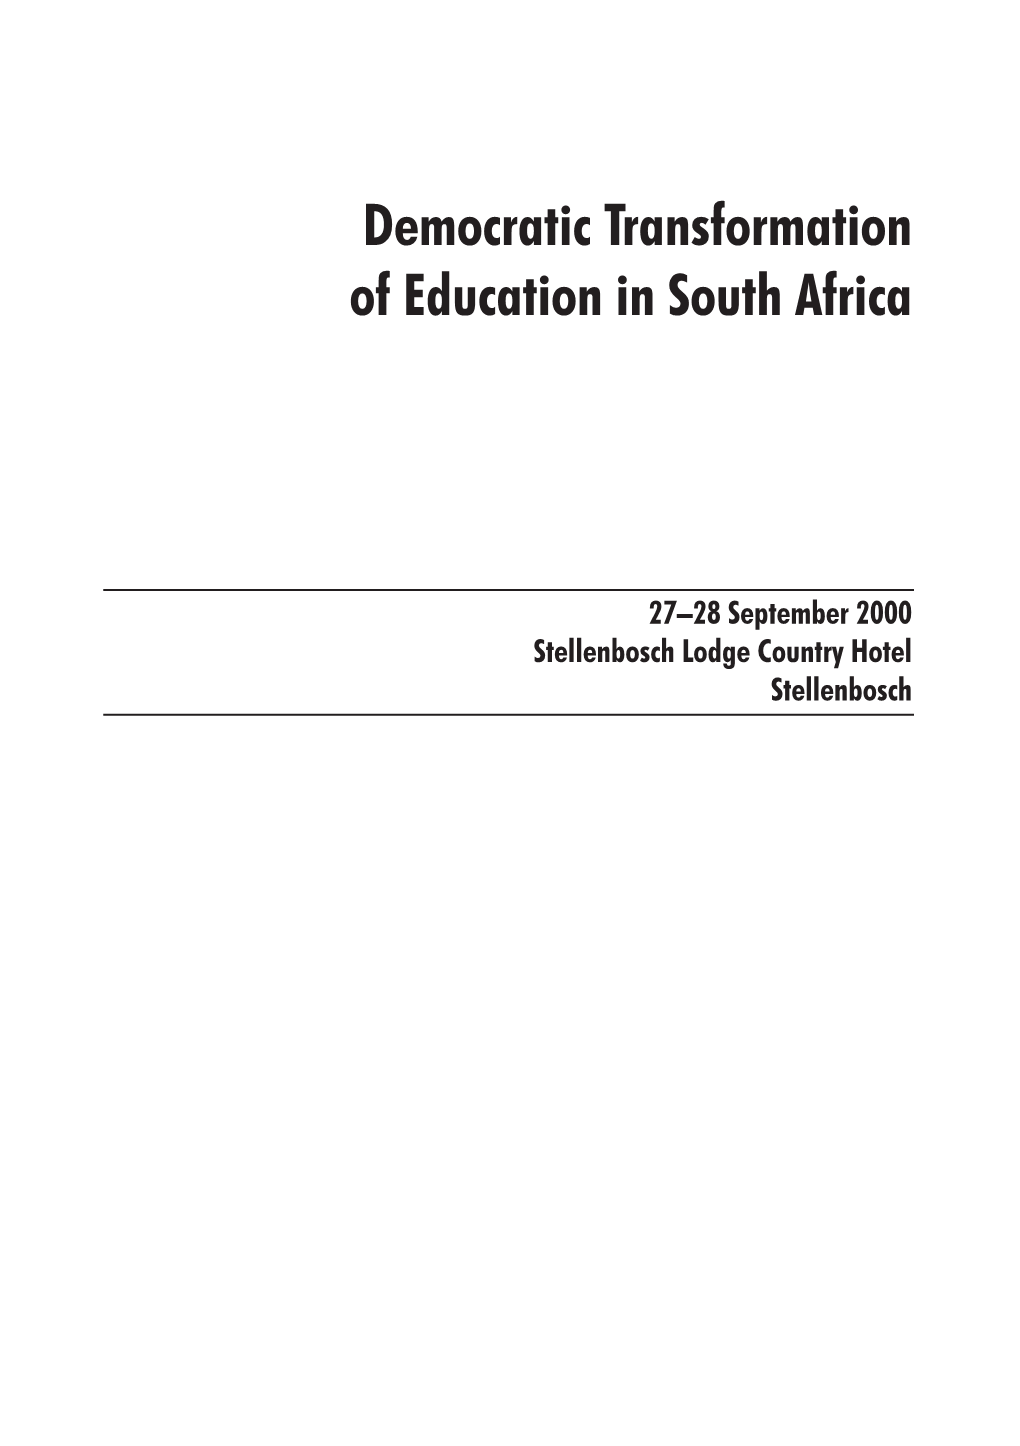 Democratic Transformation of Education in South Africa